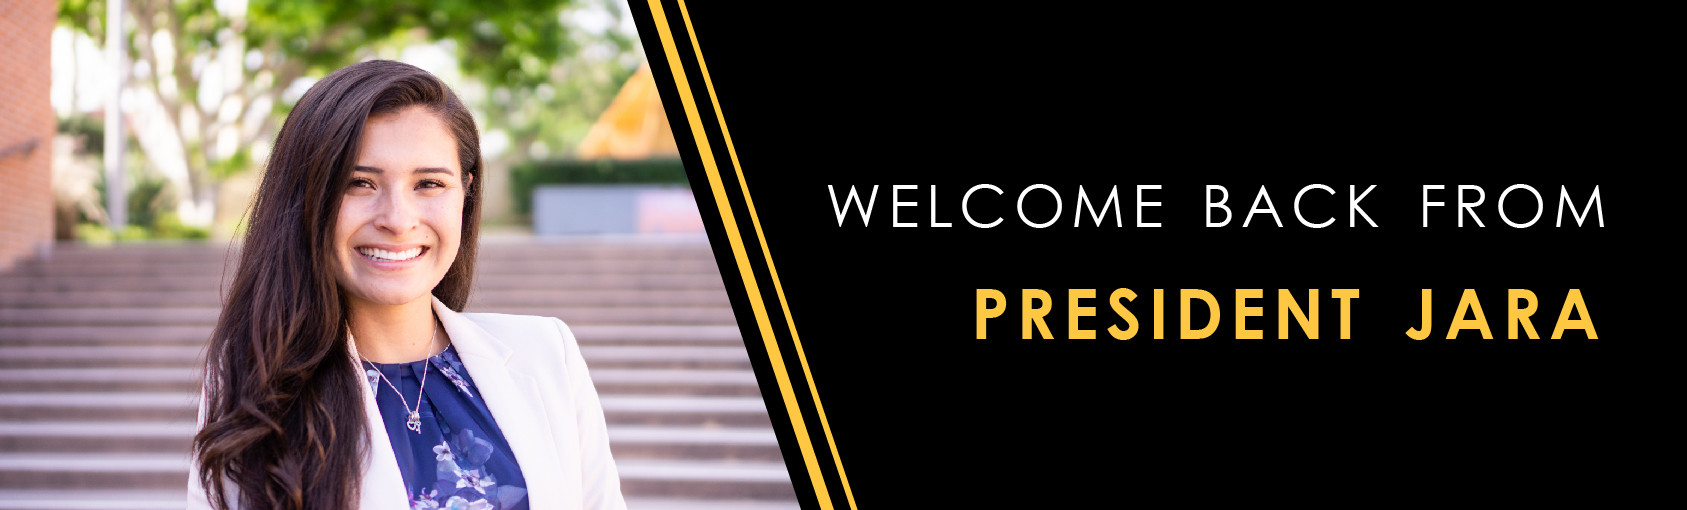 Welcome Back from President Jara Banner